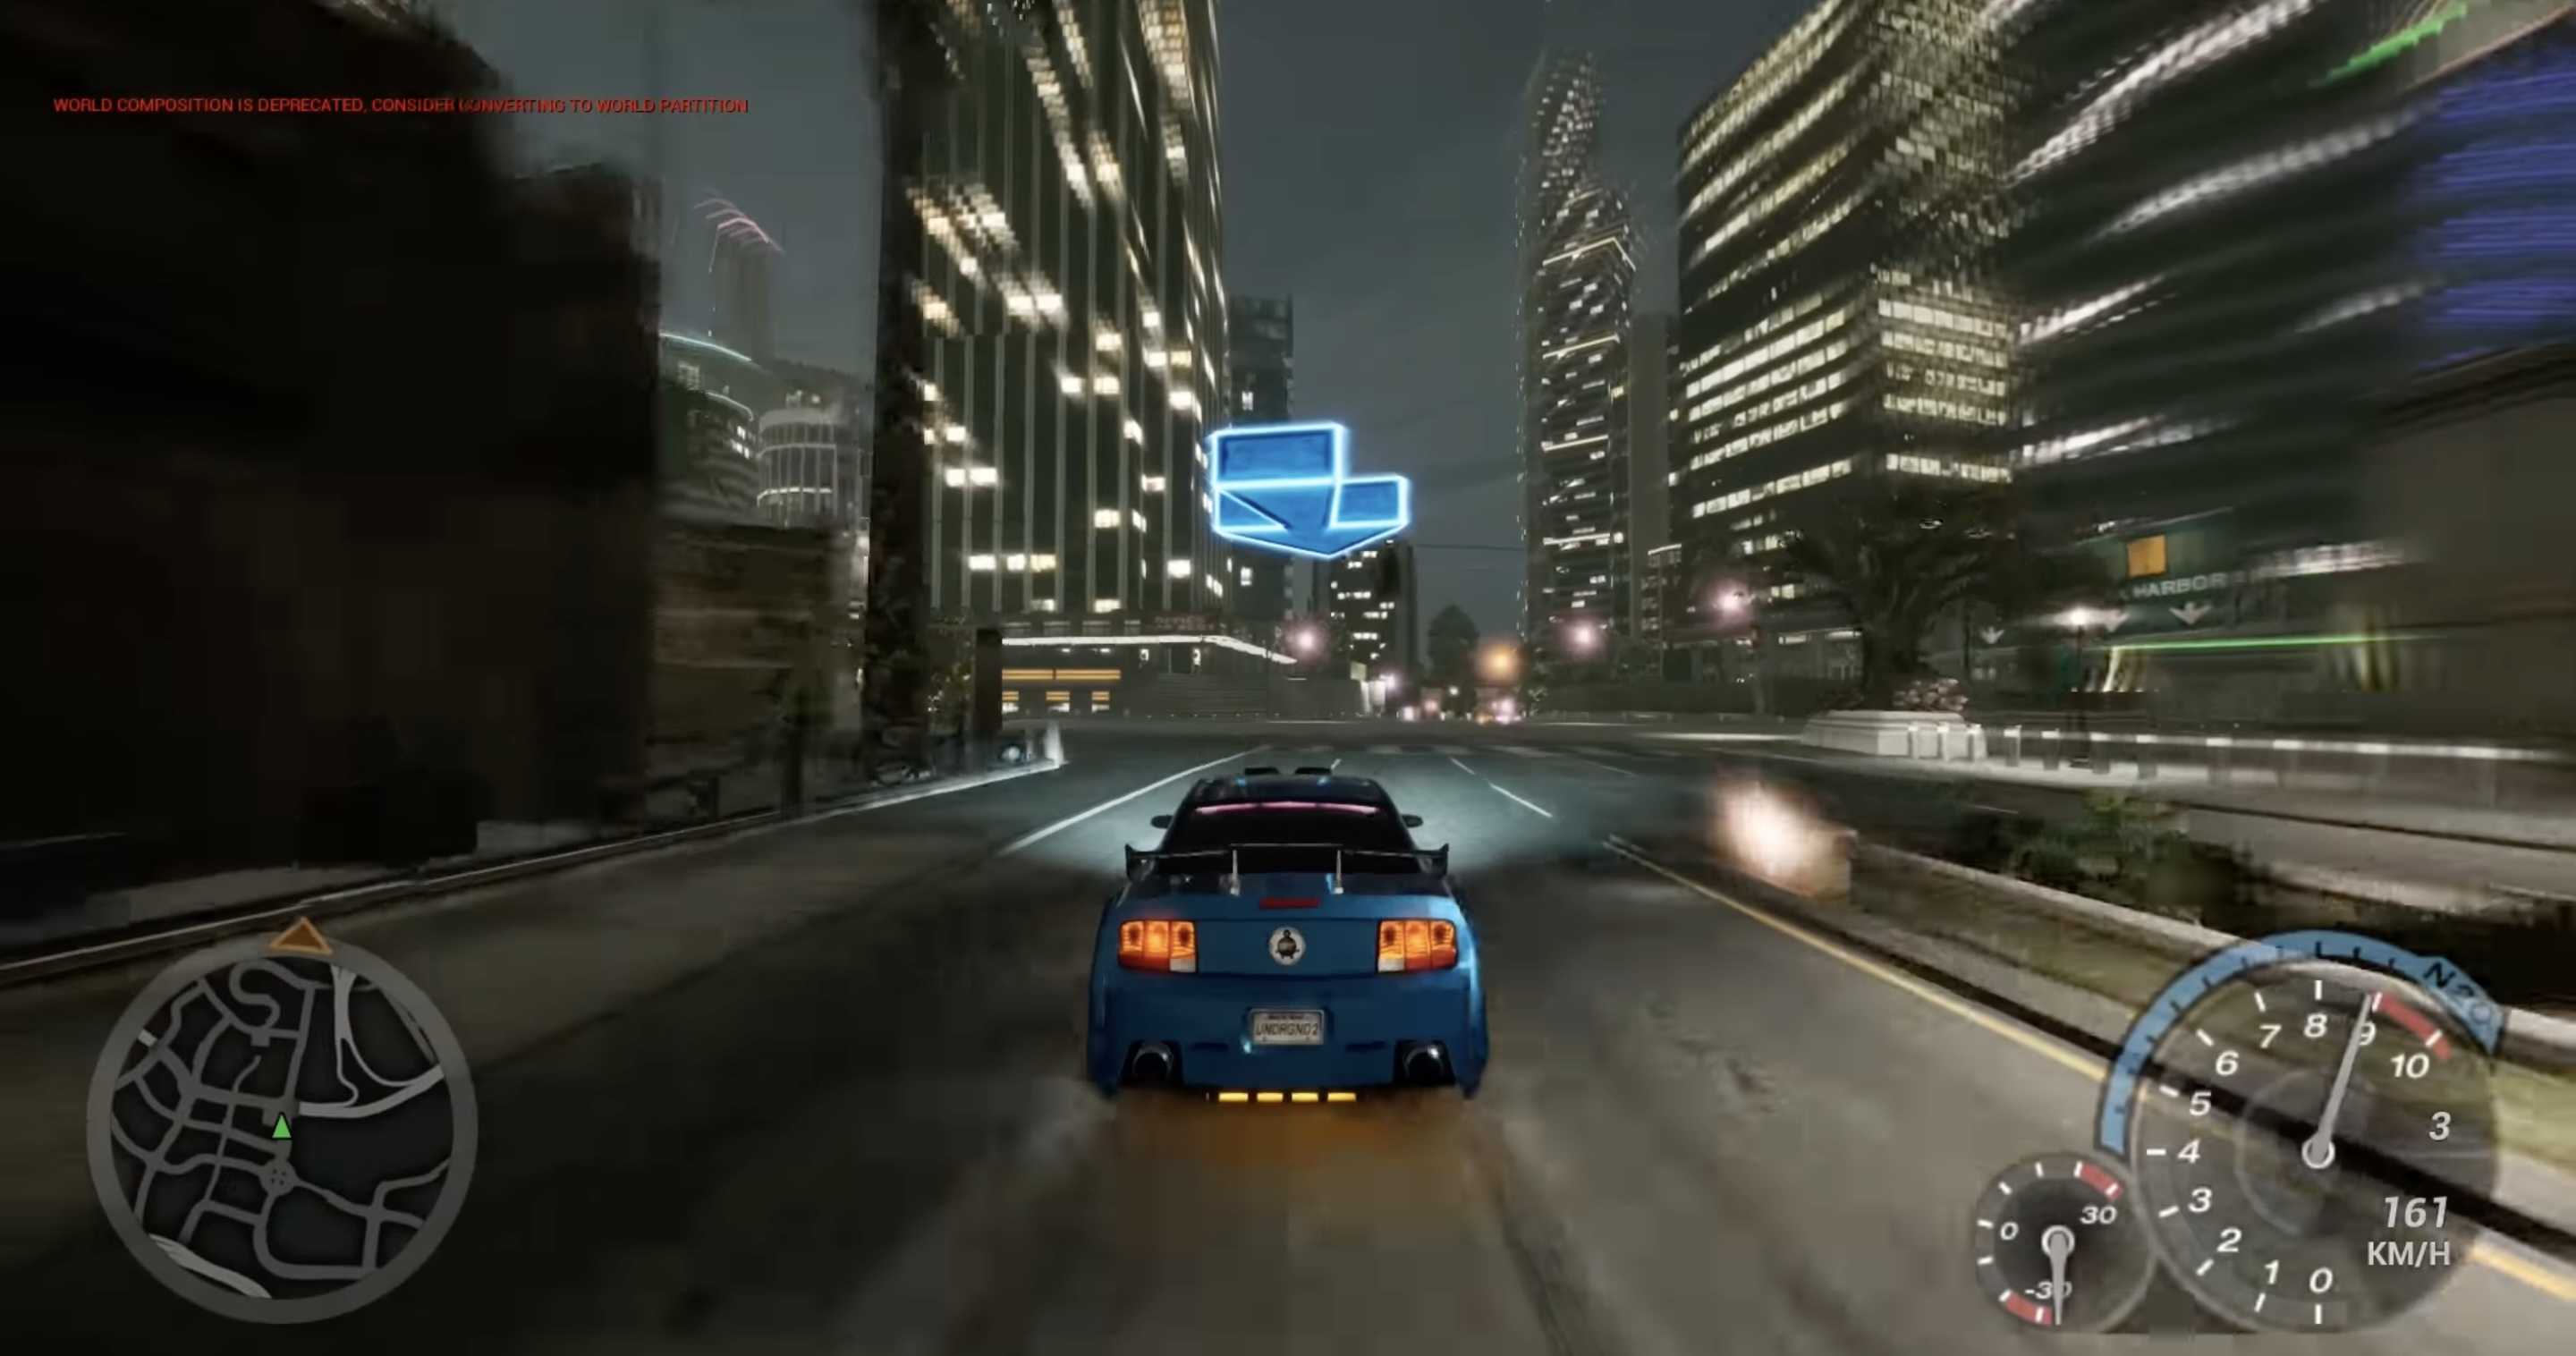 Fan Made Need For Speed Underground 2 Remaster Trailer